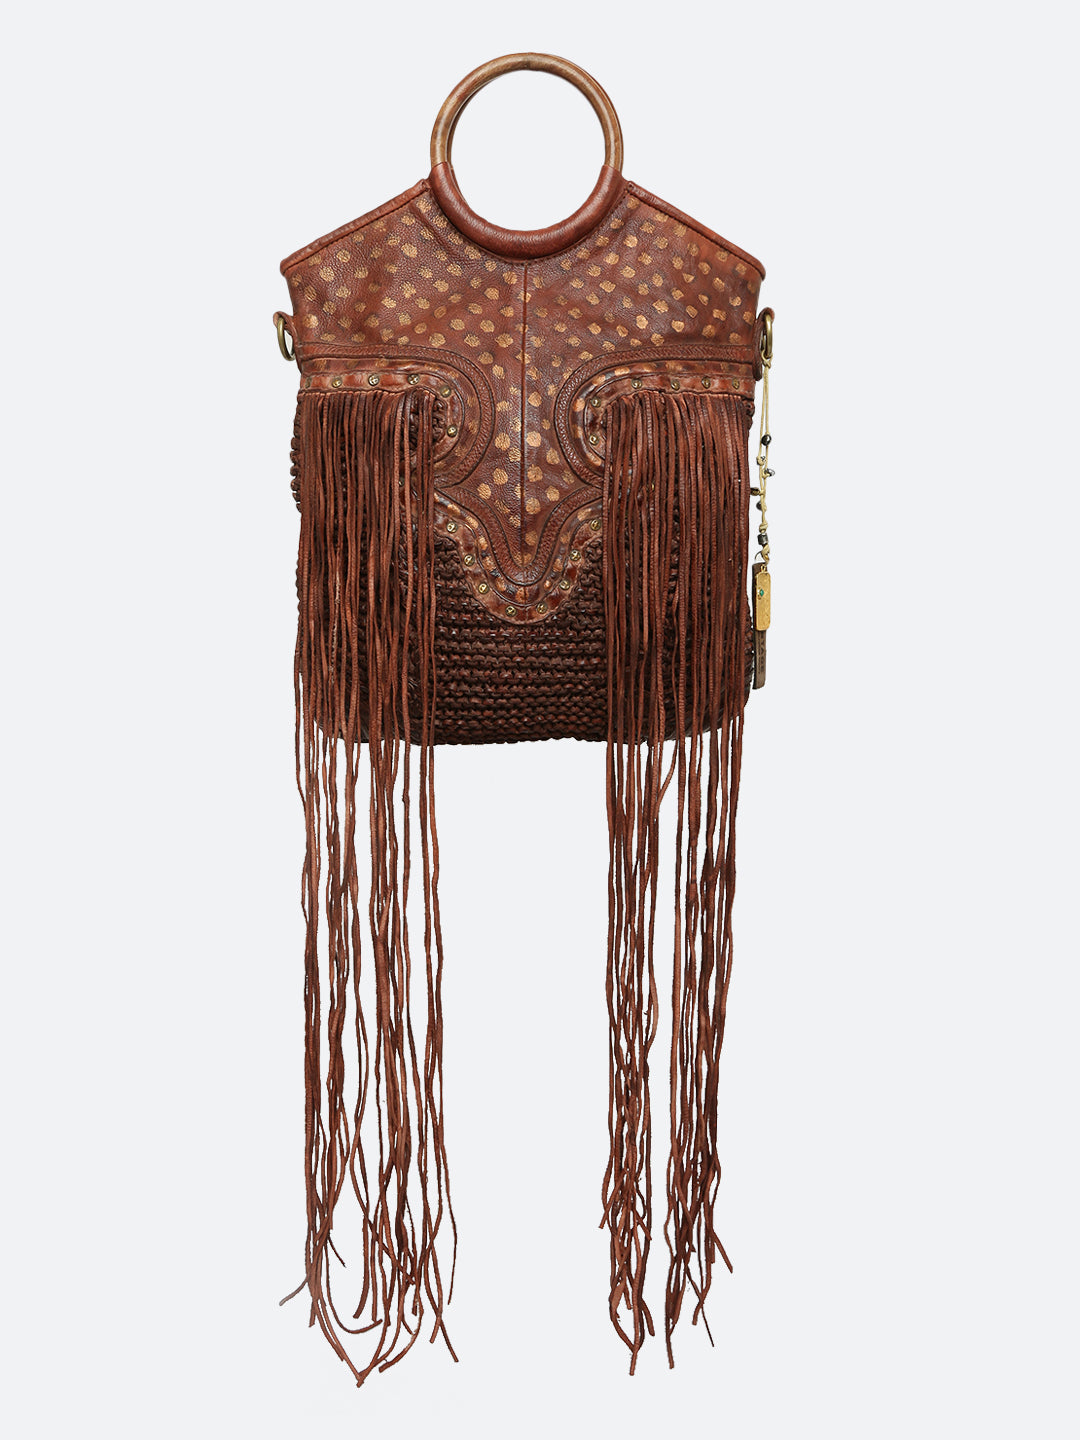 Martinka: Cognac Leather Shopper With Wooden Handle With Weaving, Fringes And Metallic Print